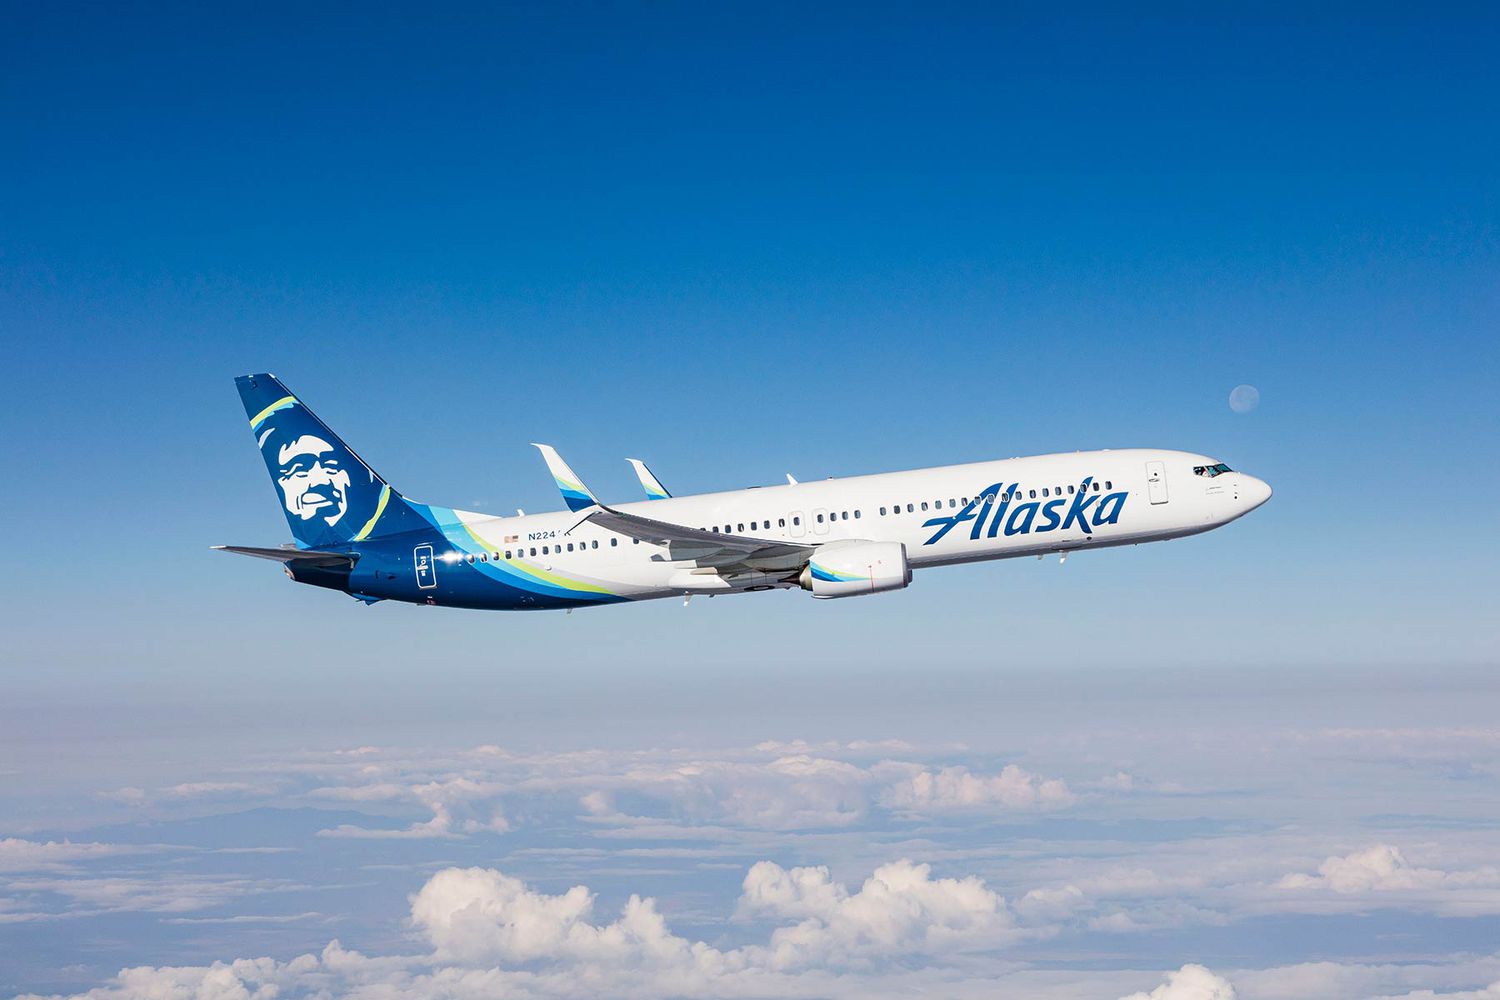 An Alaskan Airlines Worker Has Been Fired After Testing Positive For Marijuana